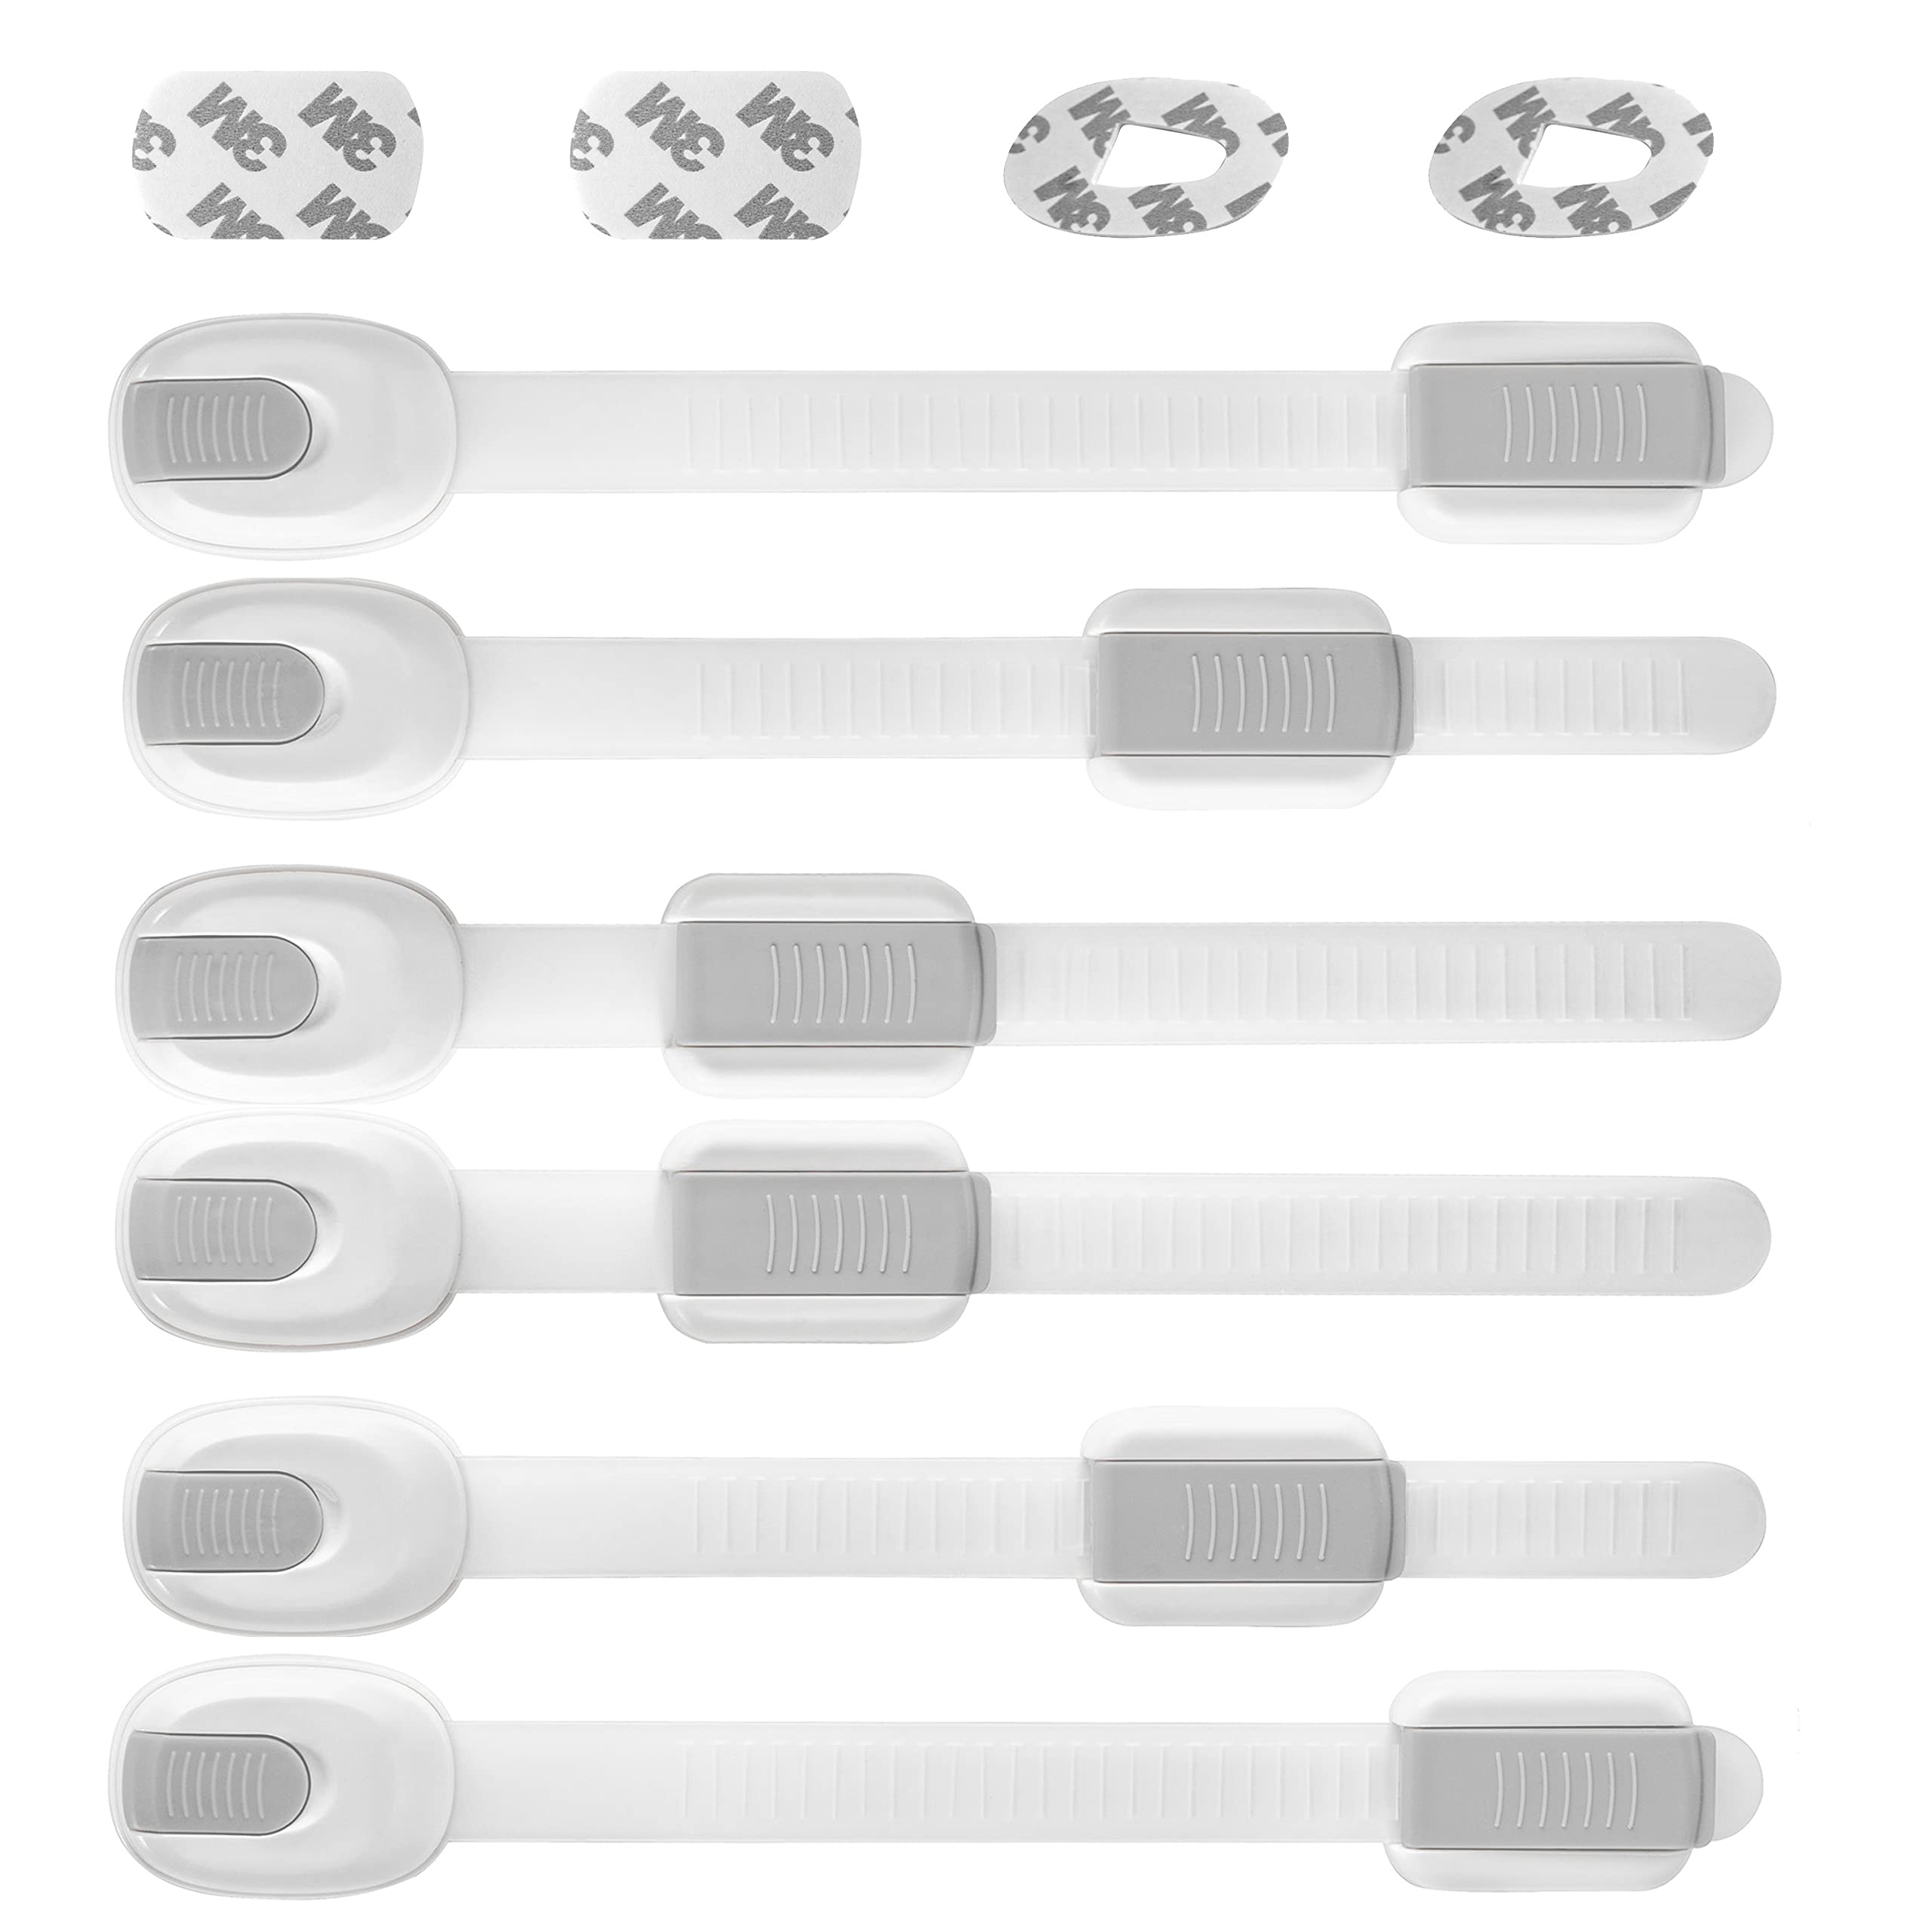 Swanou Child Safety Cupboard Locks-Baby Proofing Adjustable Strap Locks with Strong 3M Adhesive- Toddler Safety Straps for Kitchen Drawers, Toilet Seat, Oven Door-No Trapped Fingers-6 Pack-4 Extra 3M